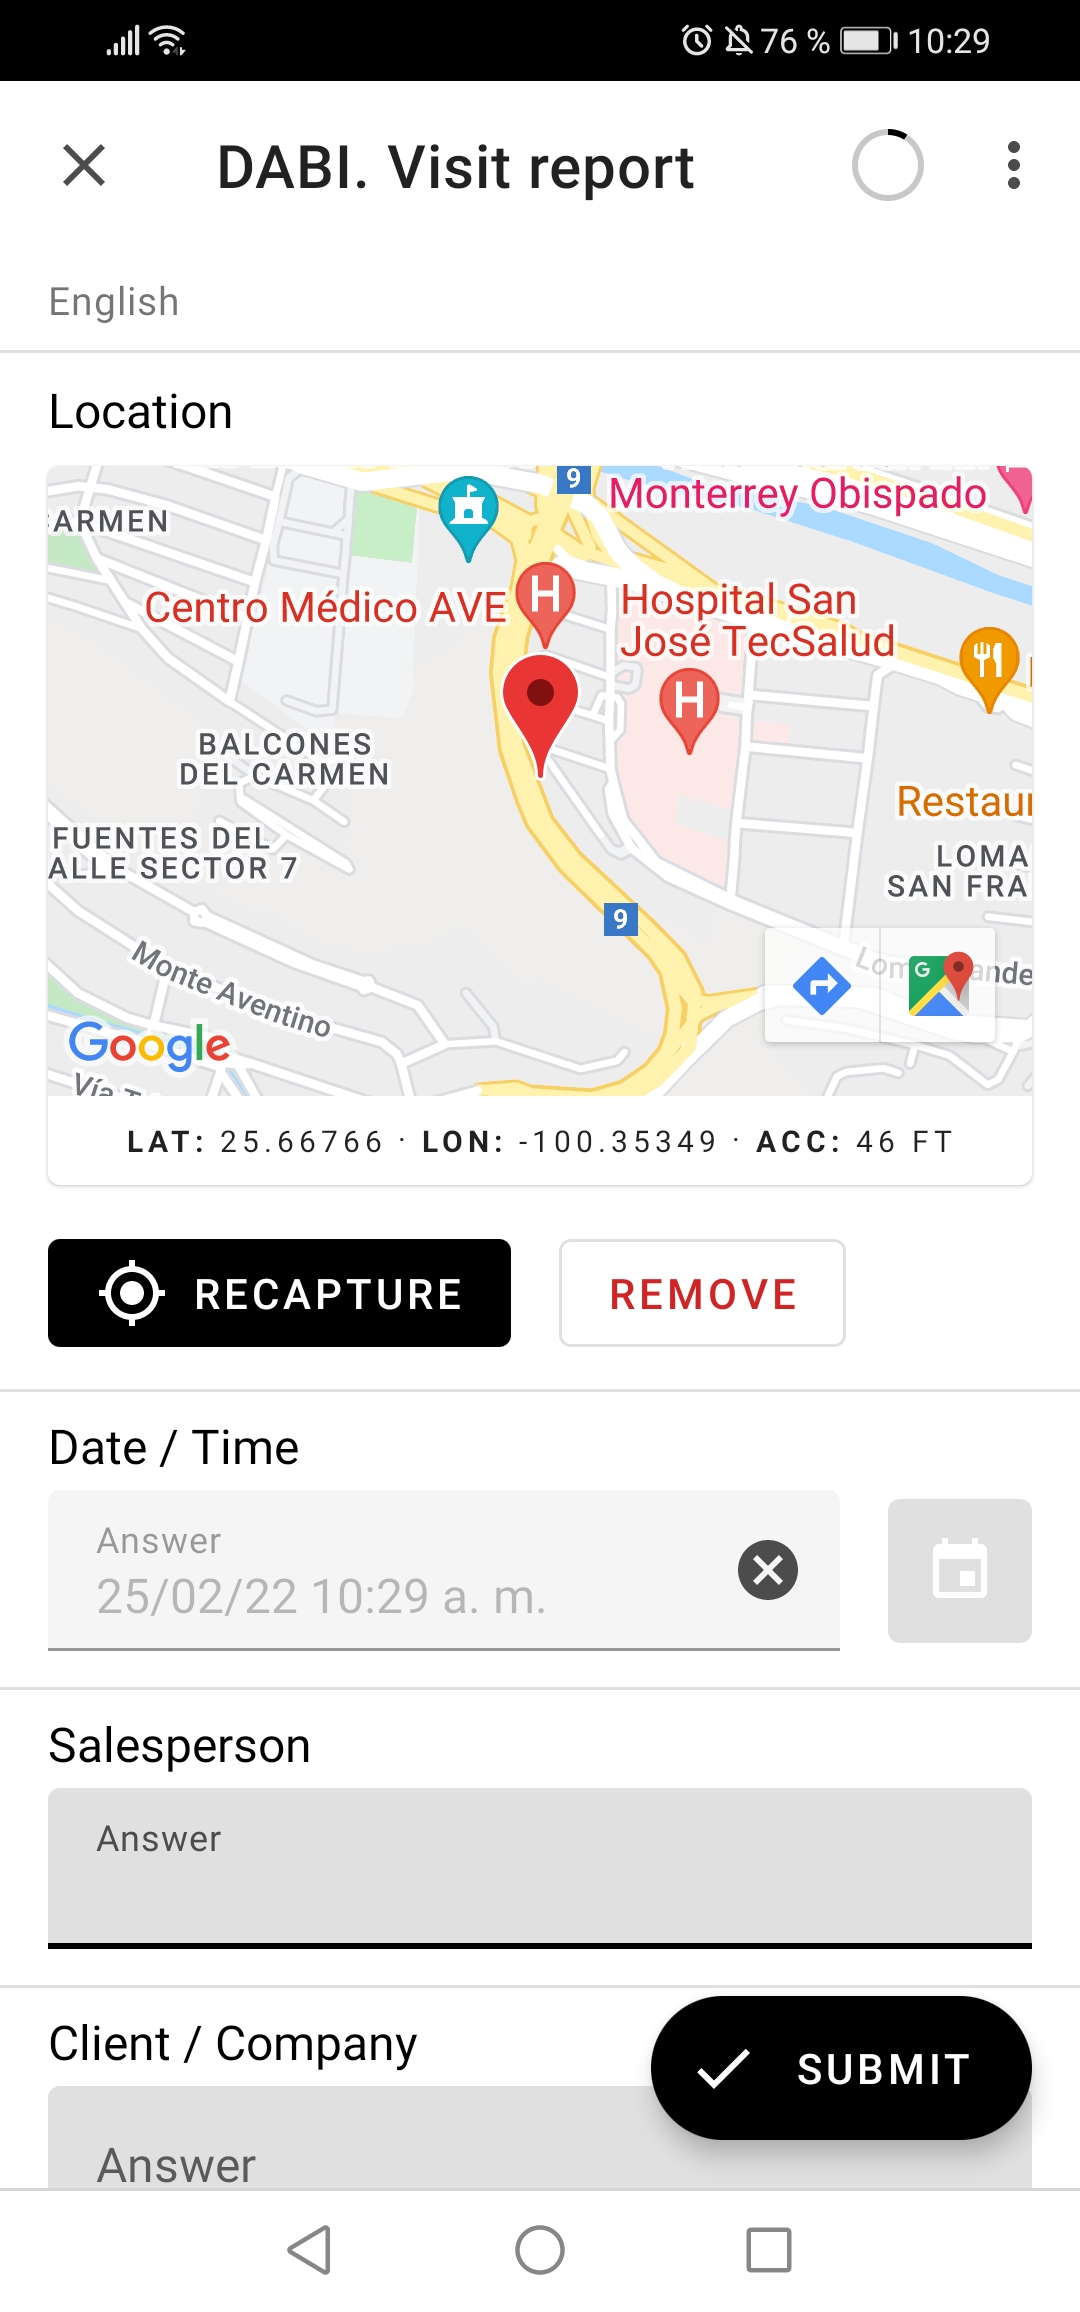 Example of a geolocation in DABI Movil